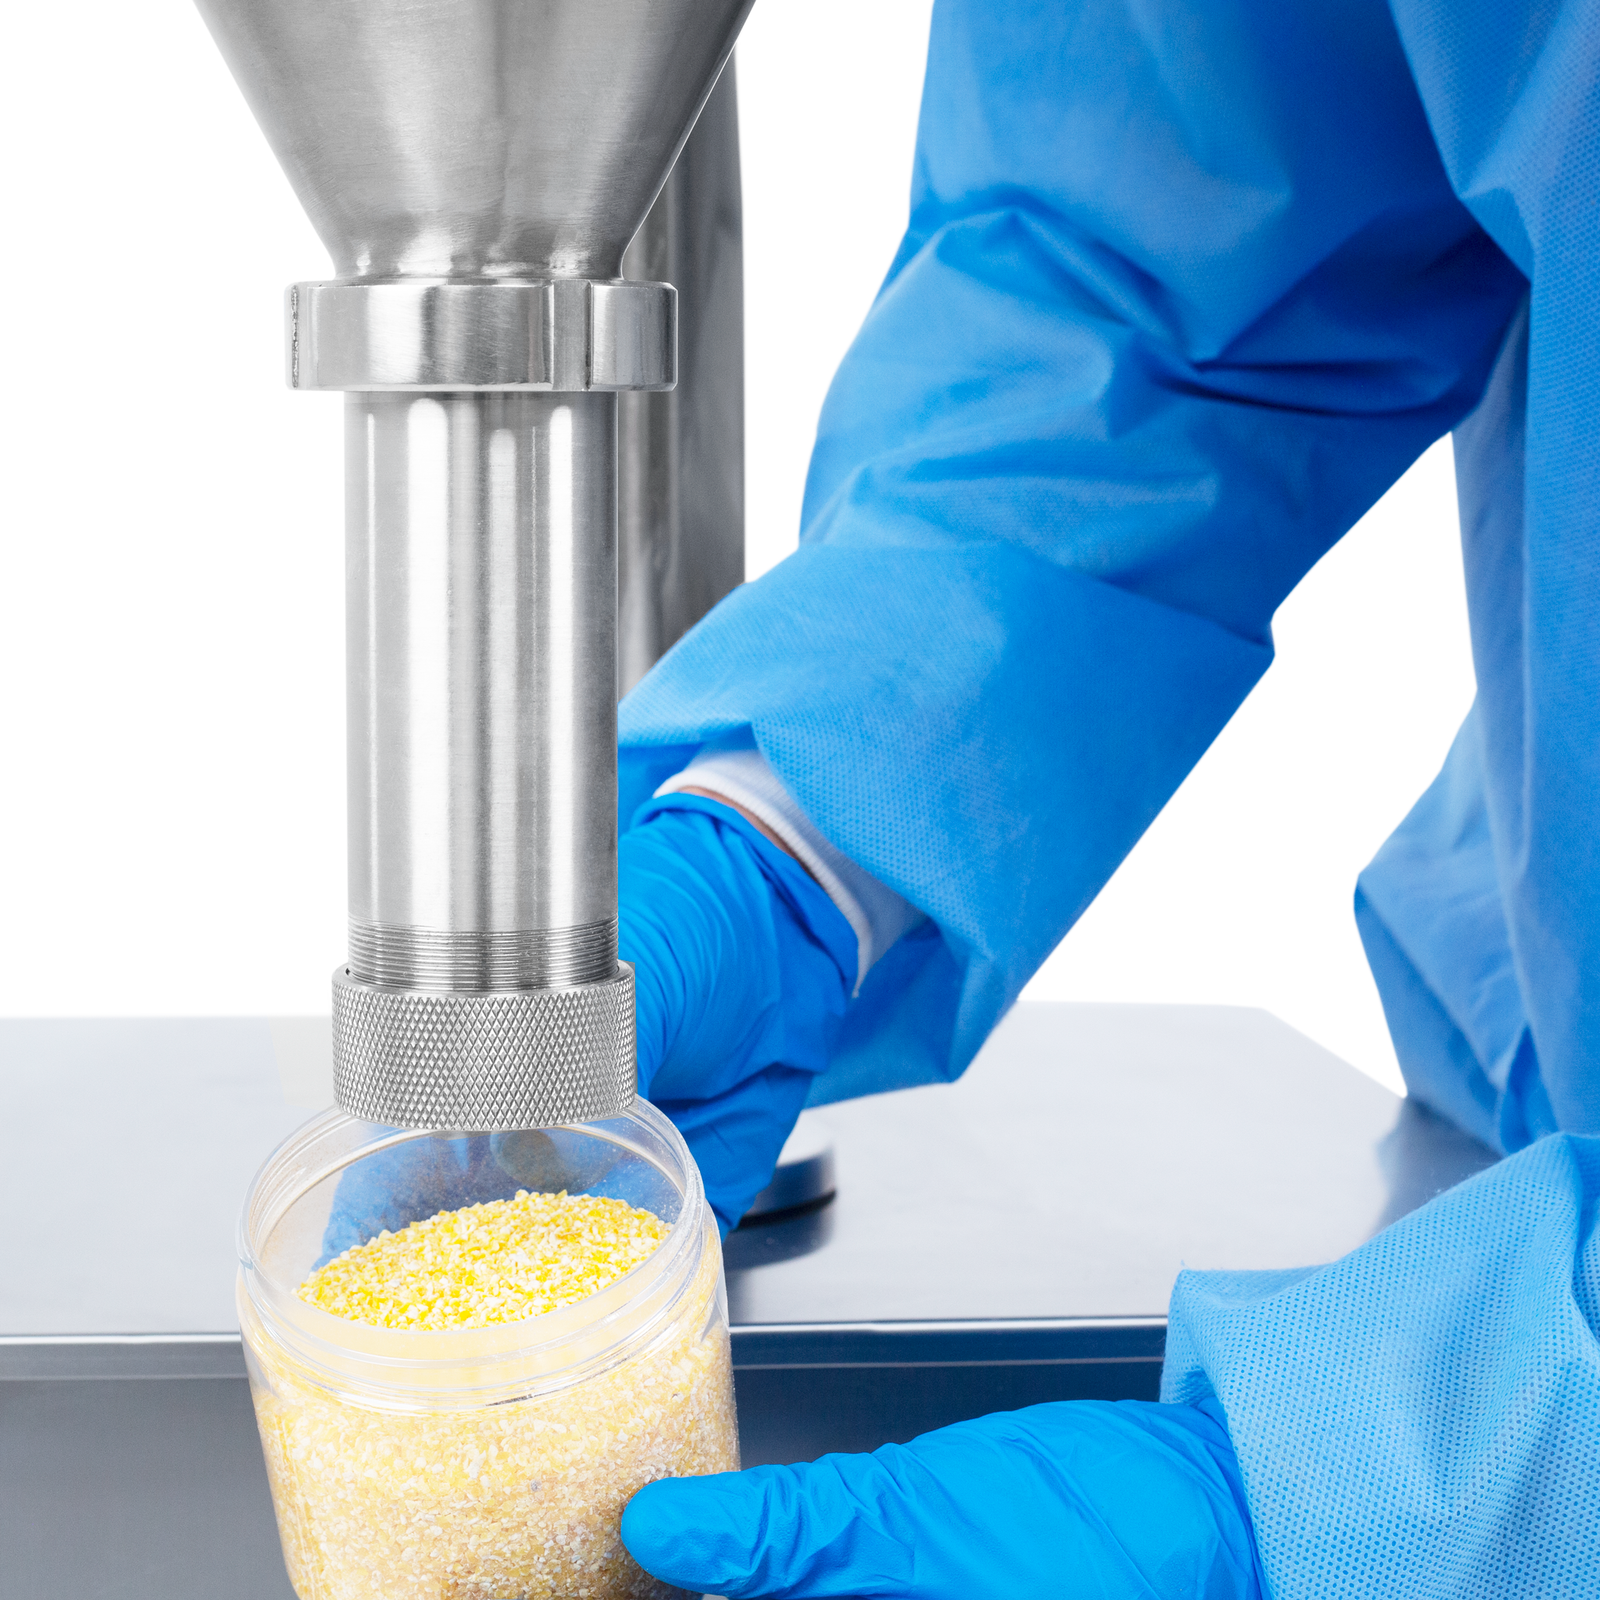 Close-up of the hands of a person with blue latex gloves and PPE holding a clear container filled with cornmeal flour. The container is held under the dispensing nozzle of an auger powder filler, which was used to the powder into the container